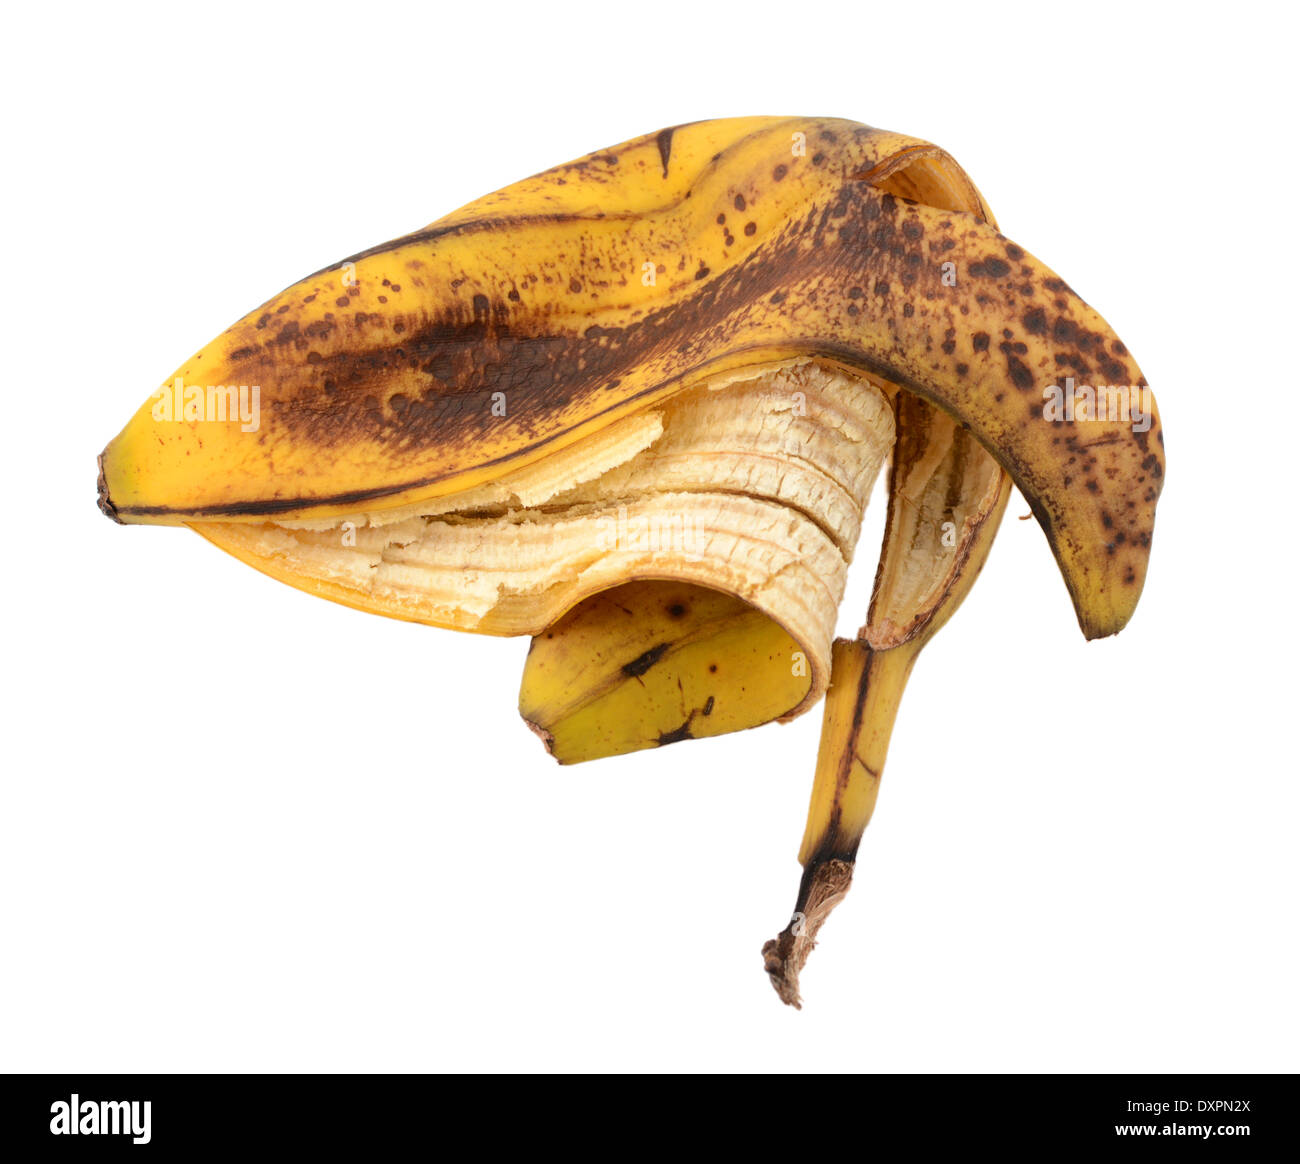 Empty spotted overripe banana skin, isolated on a white background Stock Photo